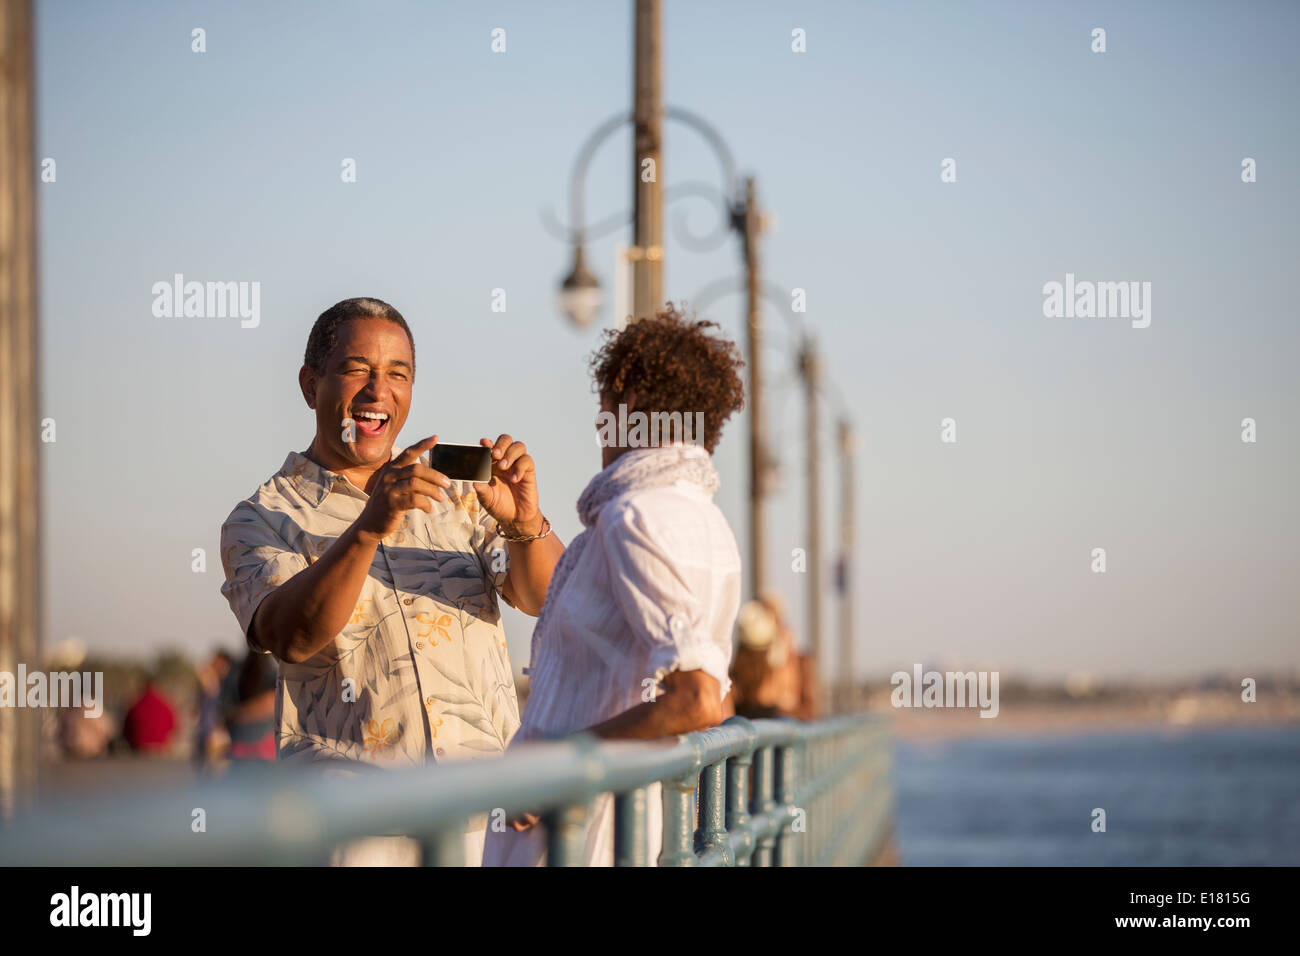 Man photographing woman on pier Banque D'Images